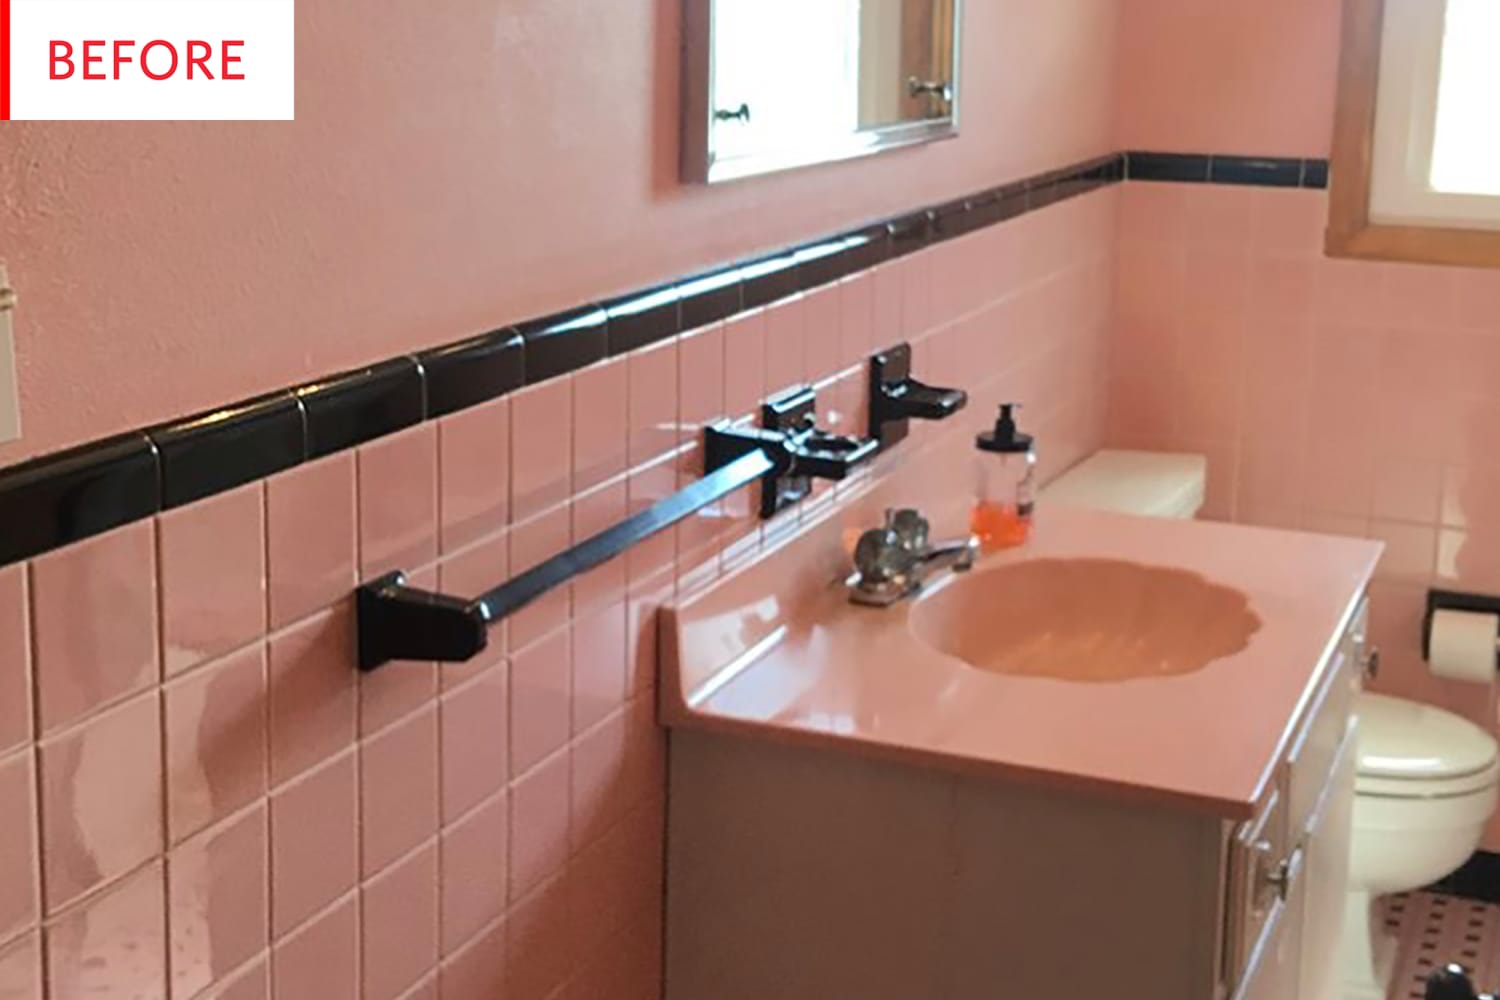 Before & After: Look What $1K Can Do to a Vintage Pink Tiled Bathroom